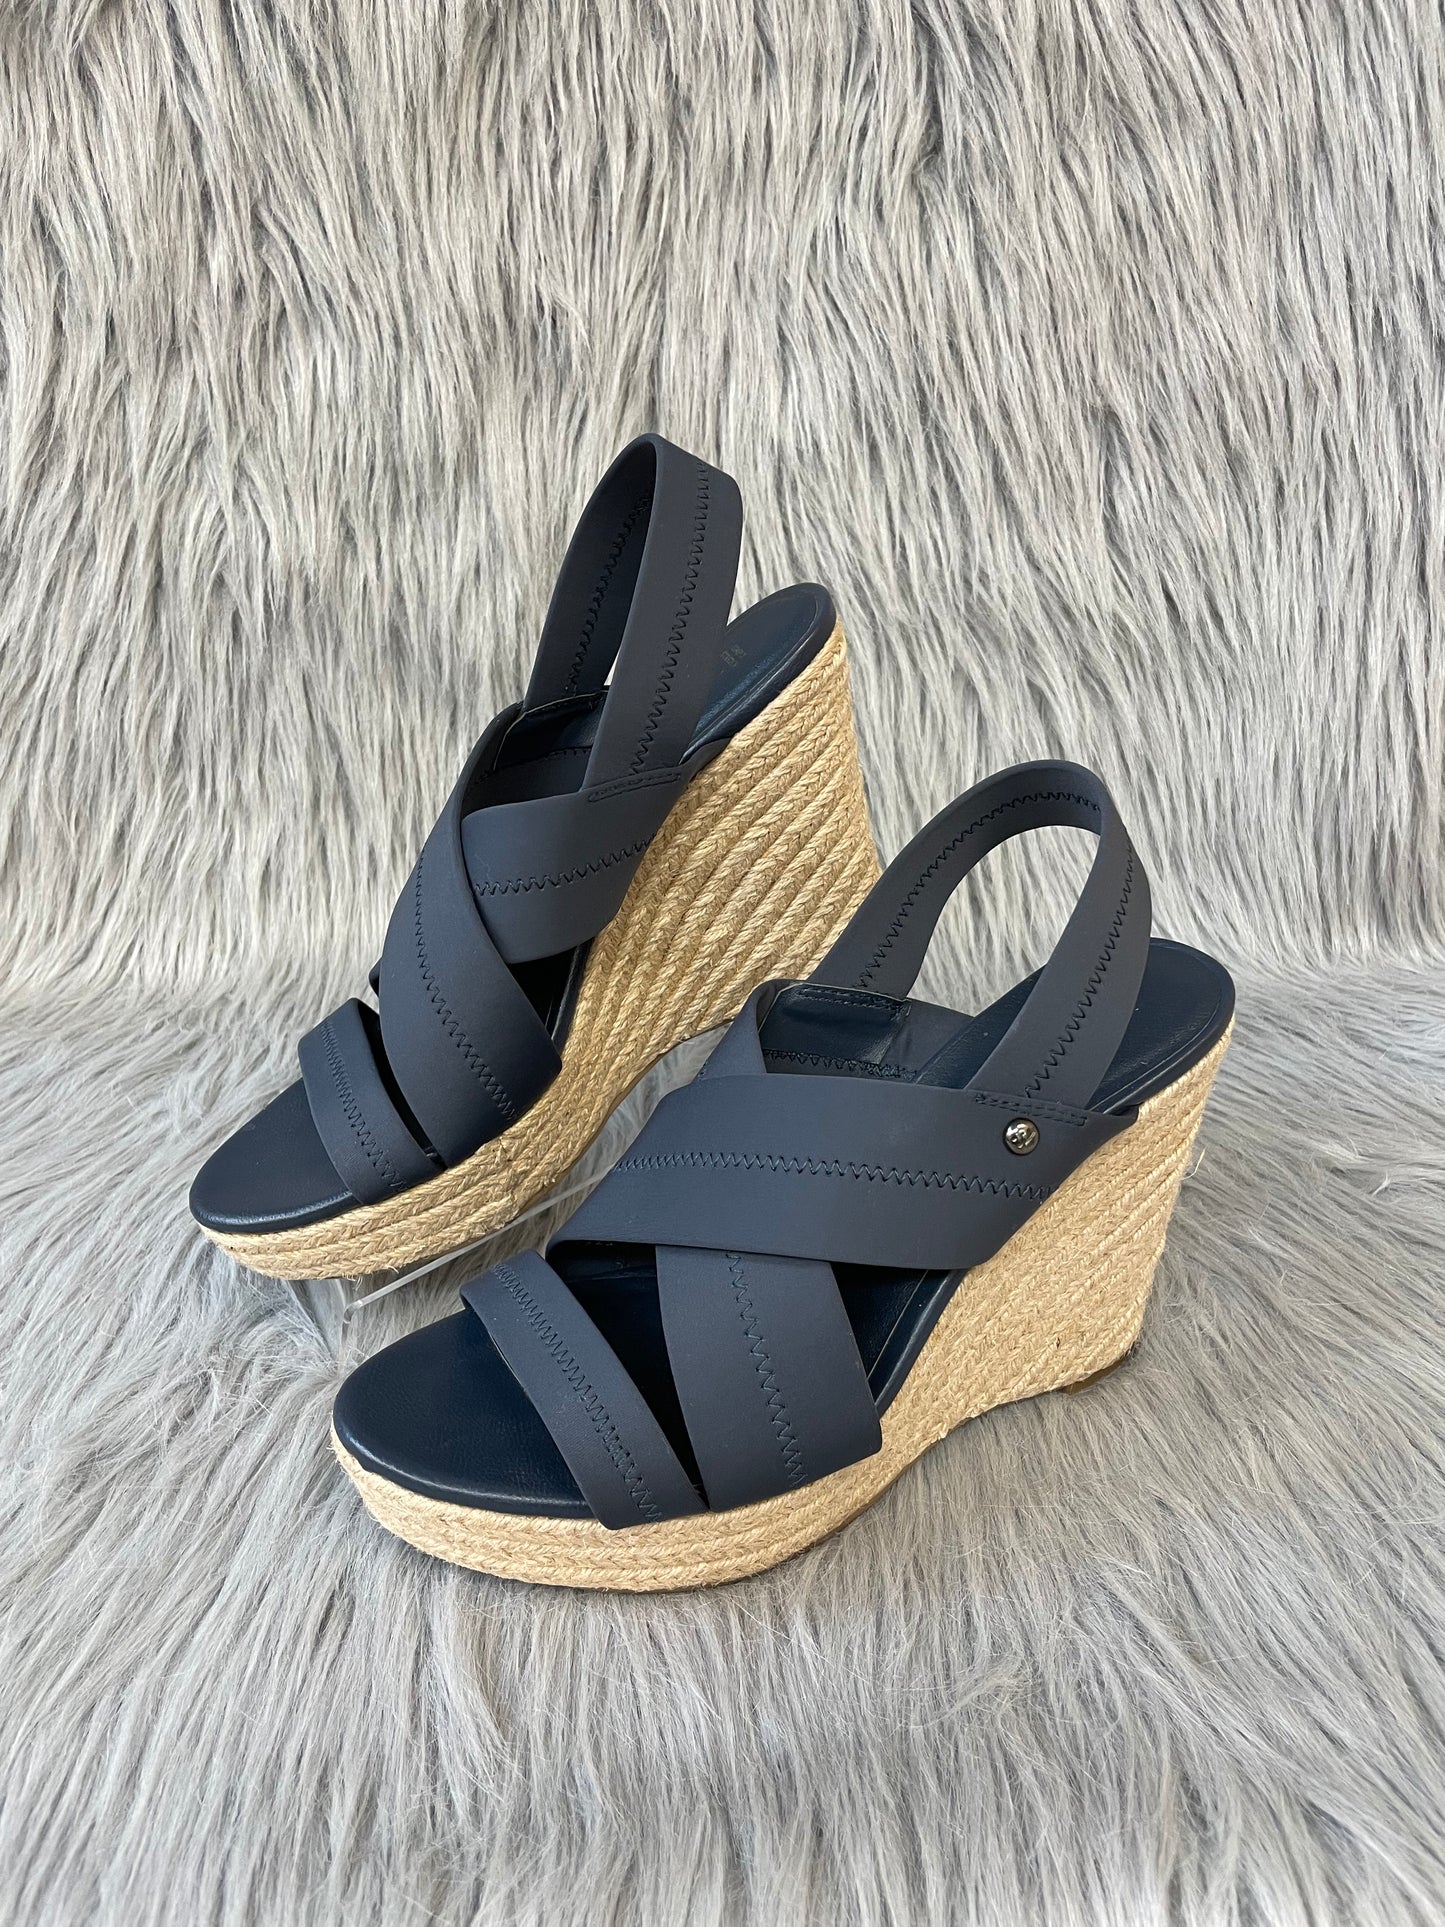 Sandals Heels Wedge By Simply Vera  Size: 8